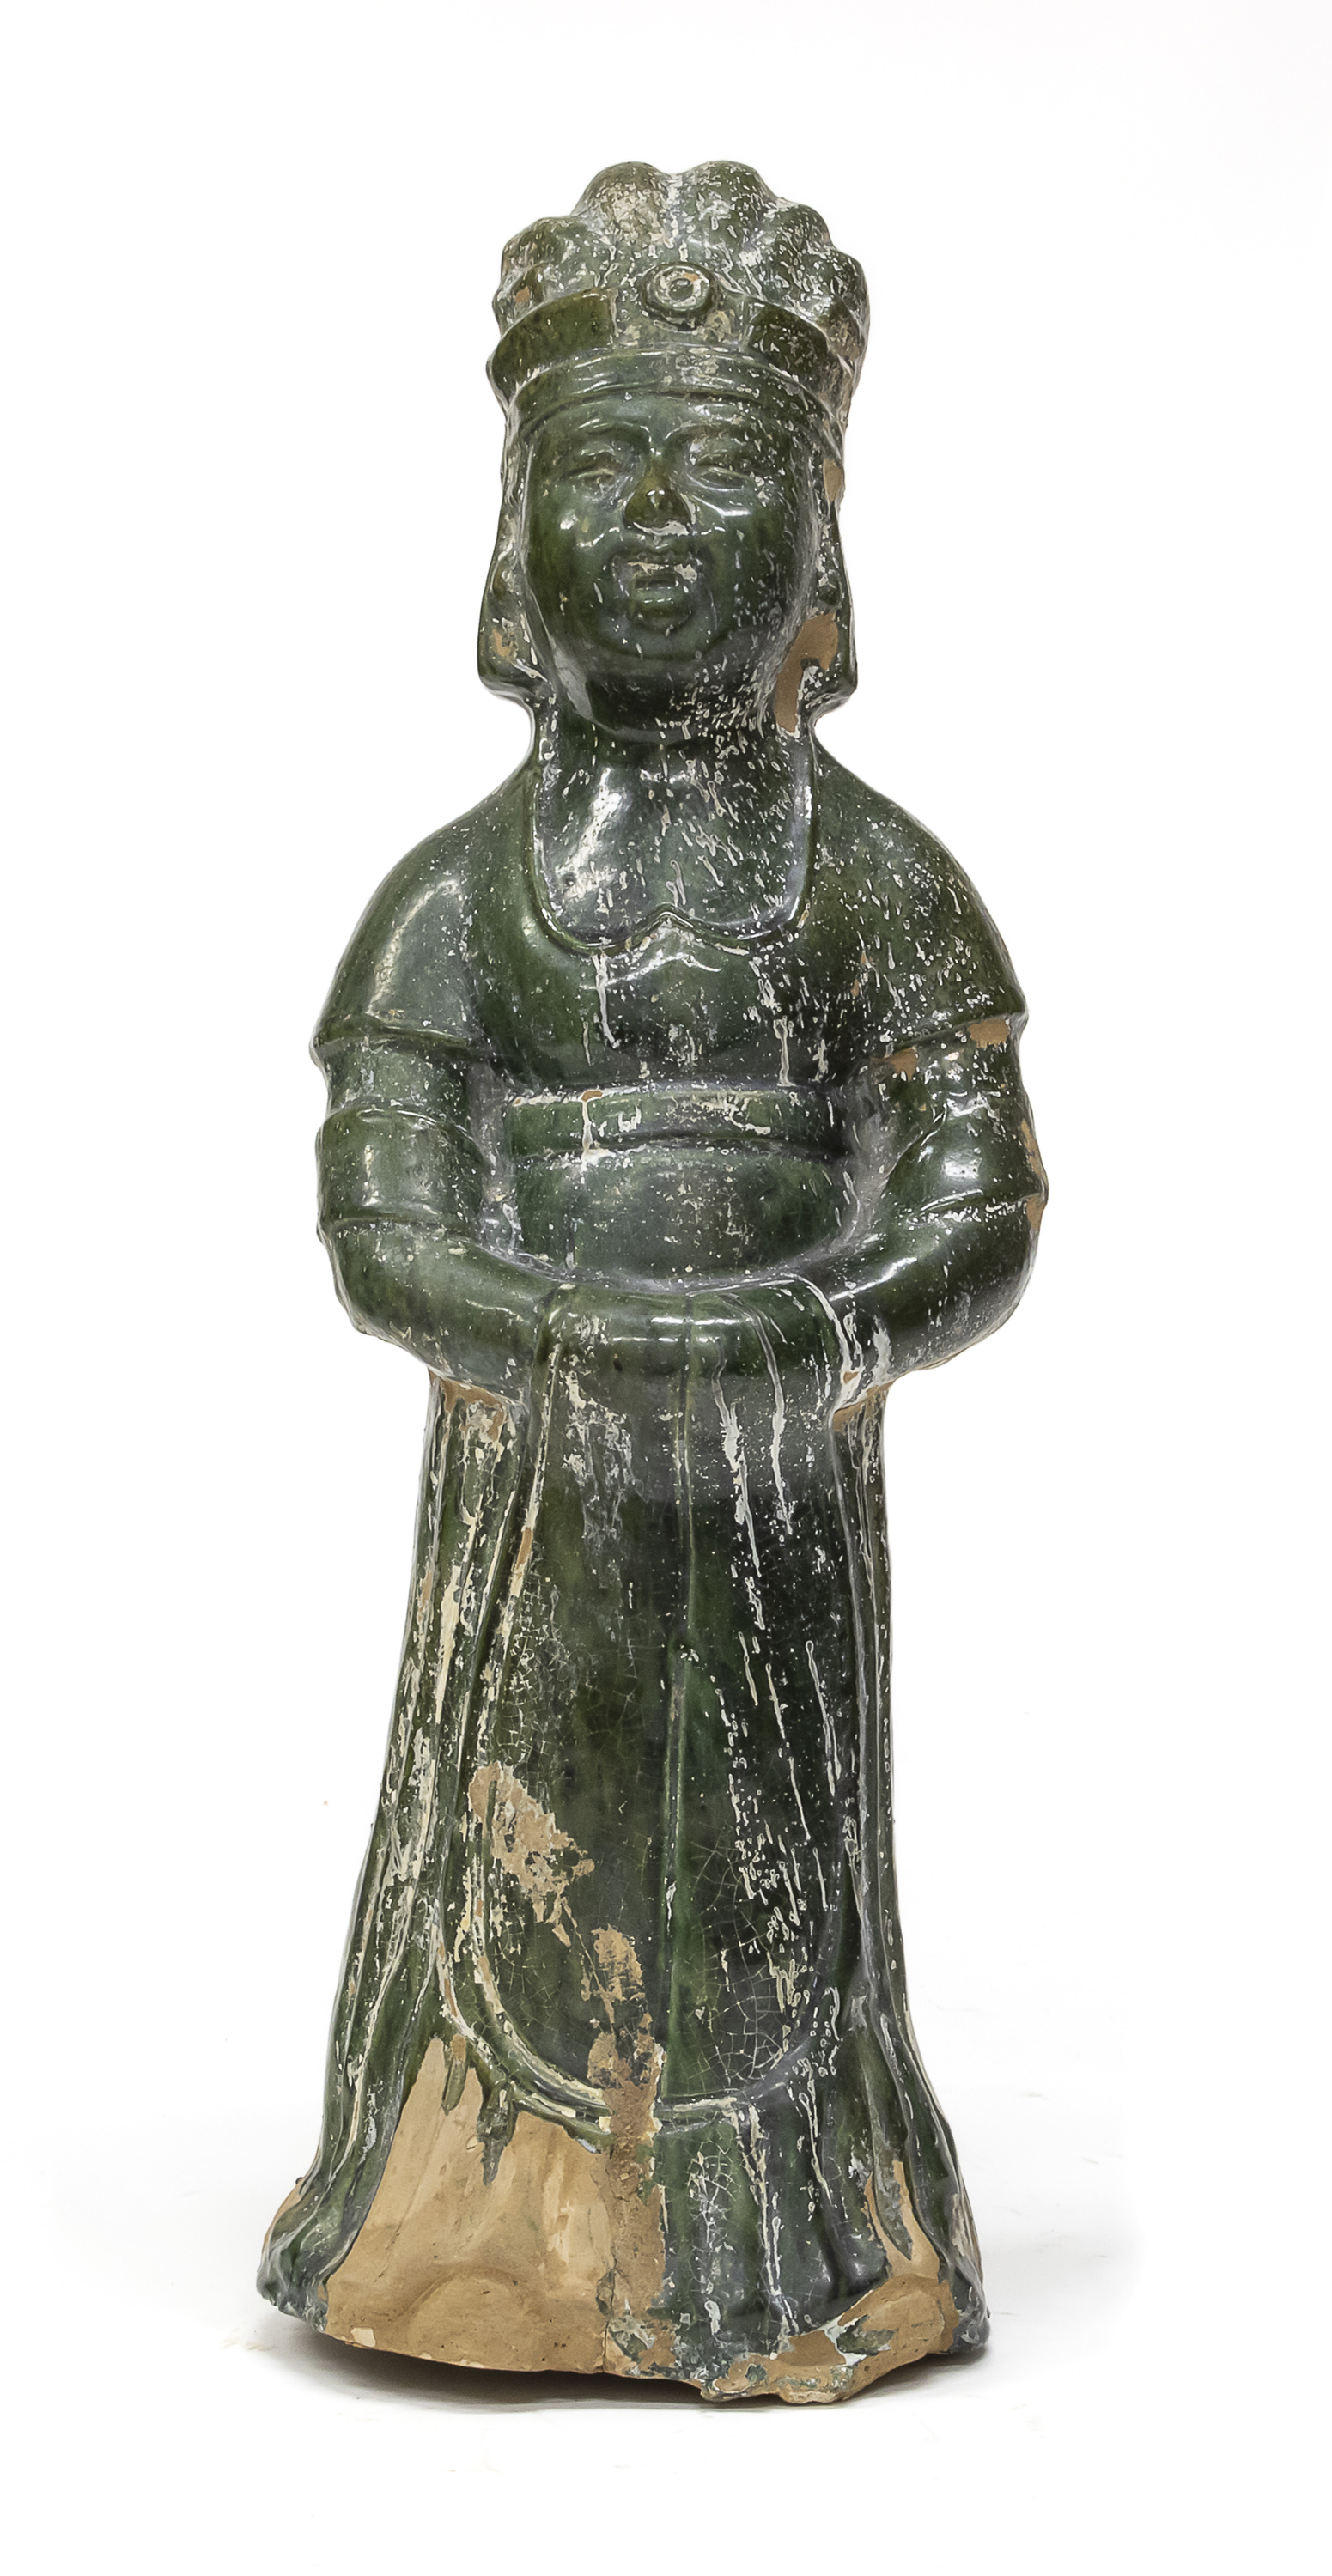 A CHINESE GREEN GLAZED EARTHENWARE SCULPTURE OF YOUNG APPRENTICE. EARLY 20TH CENTURY.